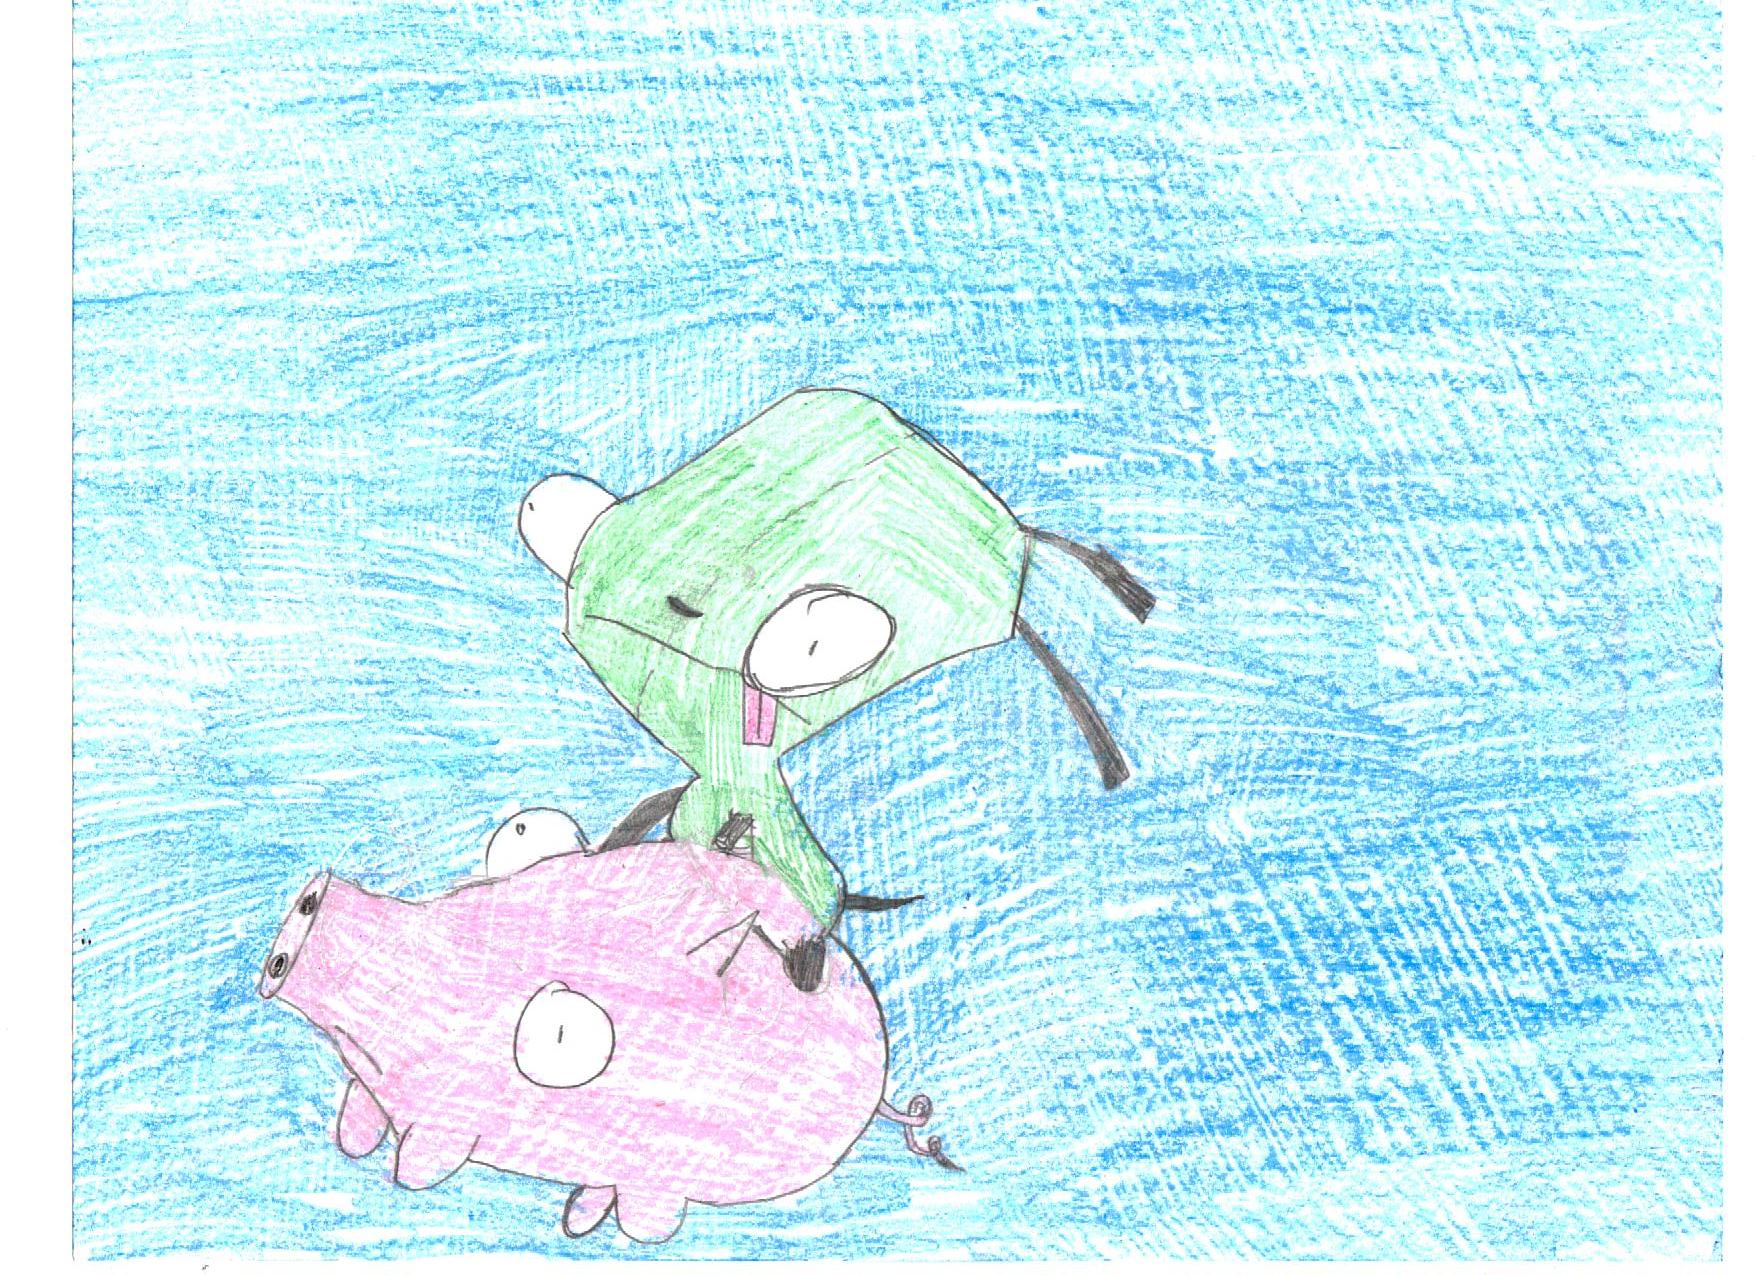 GIR AND HIS PIG by wolfman31